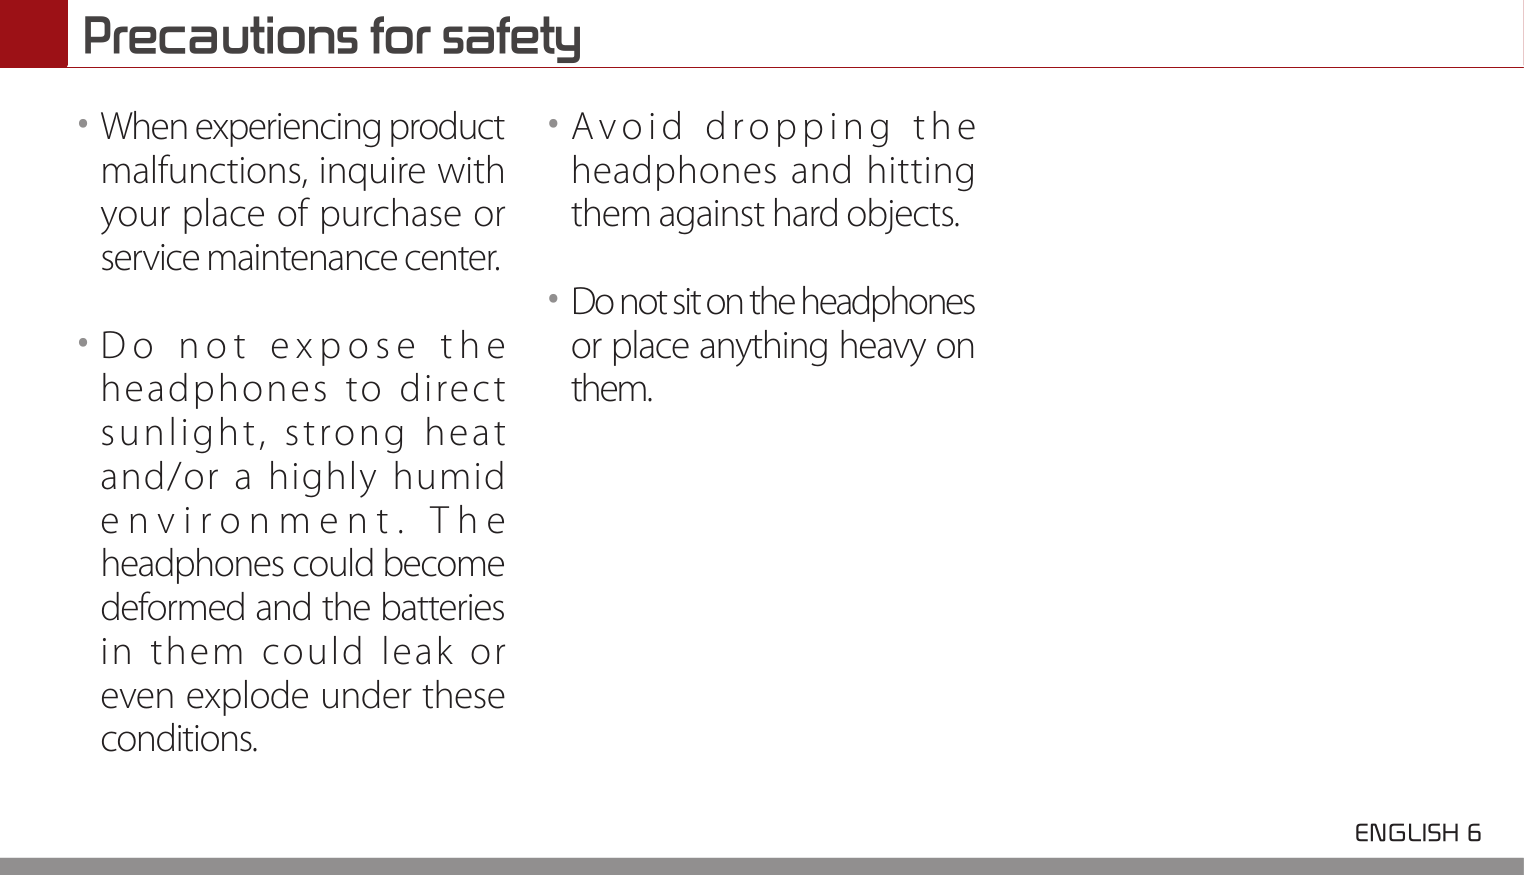 Precautions for safety ENGLISH 6 ••When experiencing product malfunctions, inquire with your place of purchase or service maintenance center.••Do not expose the headphones to direct sunlight, strong heat and/or a highly humid environment. The headphones could become deformed and the batteries in them could leak or even explode under these conditions.••Avoid dropping the headphones and hitting them against hard objects.••Do not sit on the headphones or place anything heavy on them.